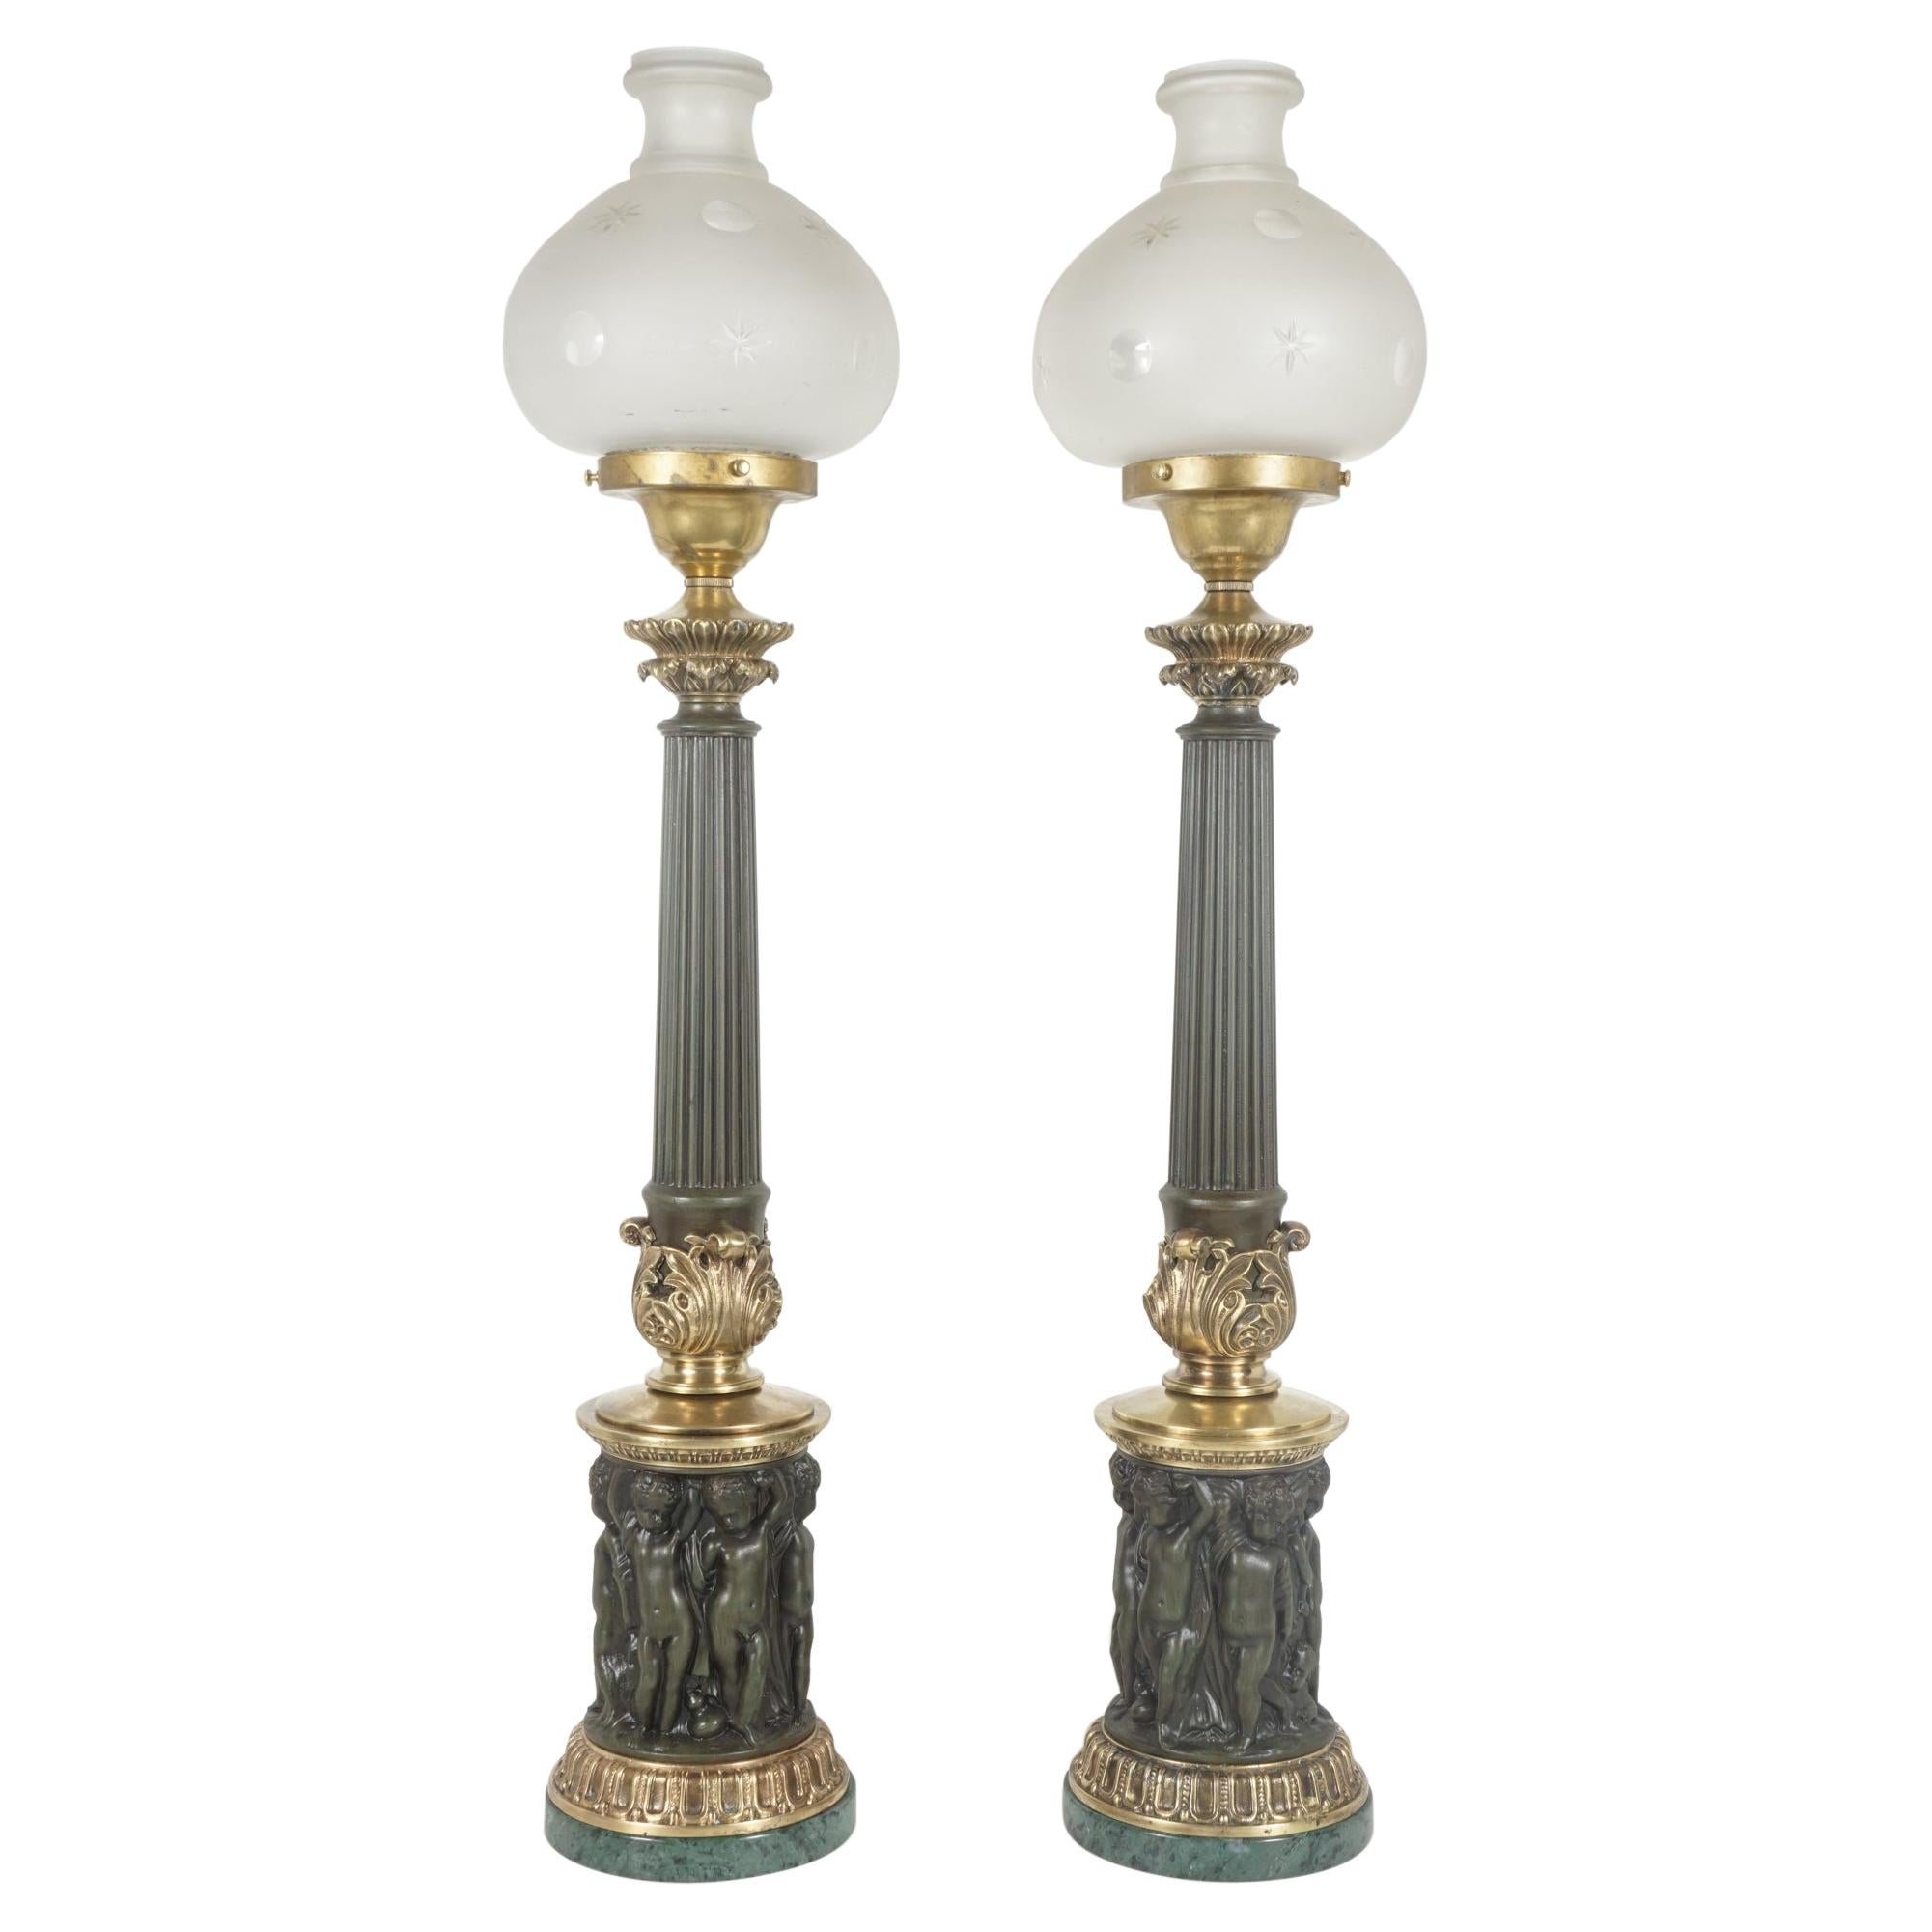 Pair of Cast Brass & Tole Neoclassical Sinumbra Style Lamps